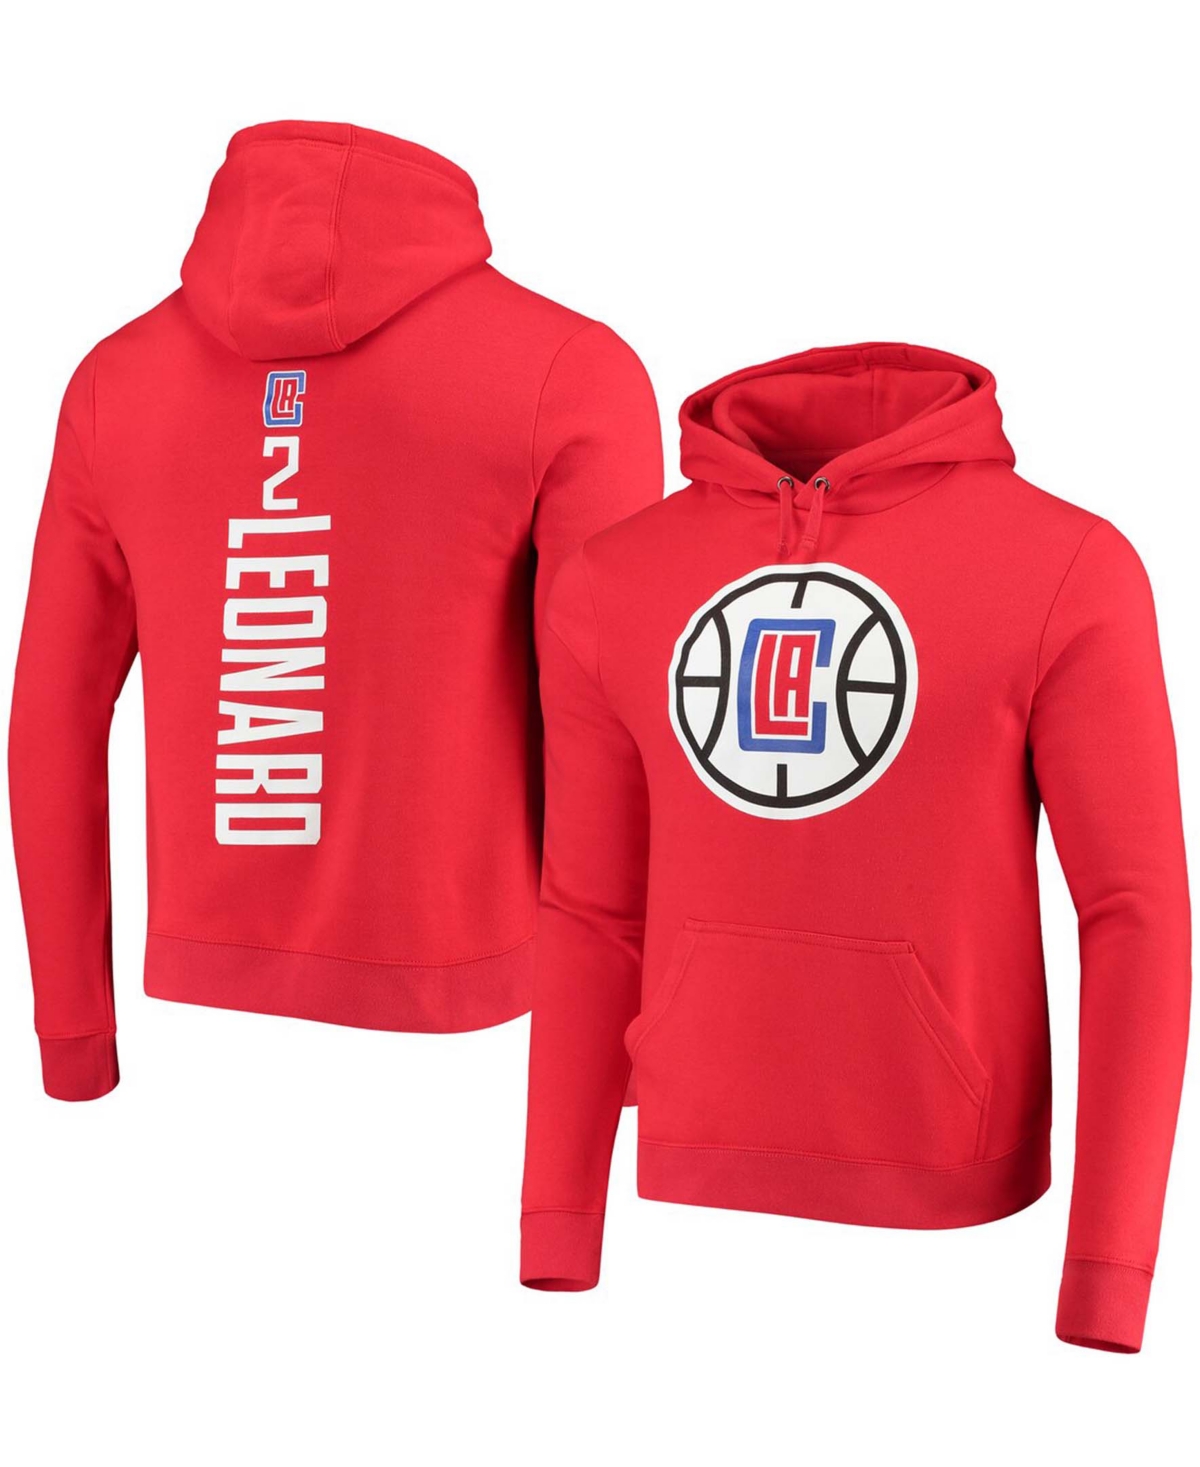 Shop Fanatics Men's Kawhi Leonard Red La Clippers Team Playmaker Name And Number Pullover Hoodie